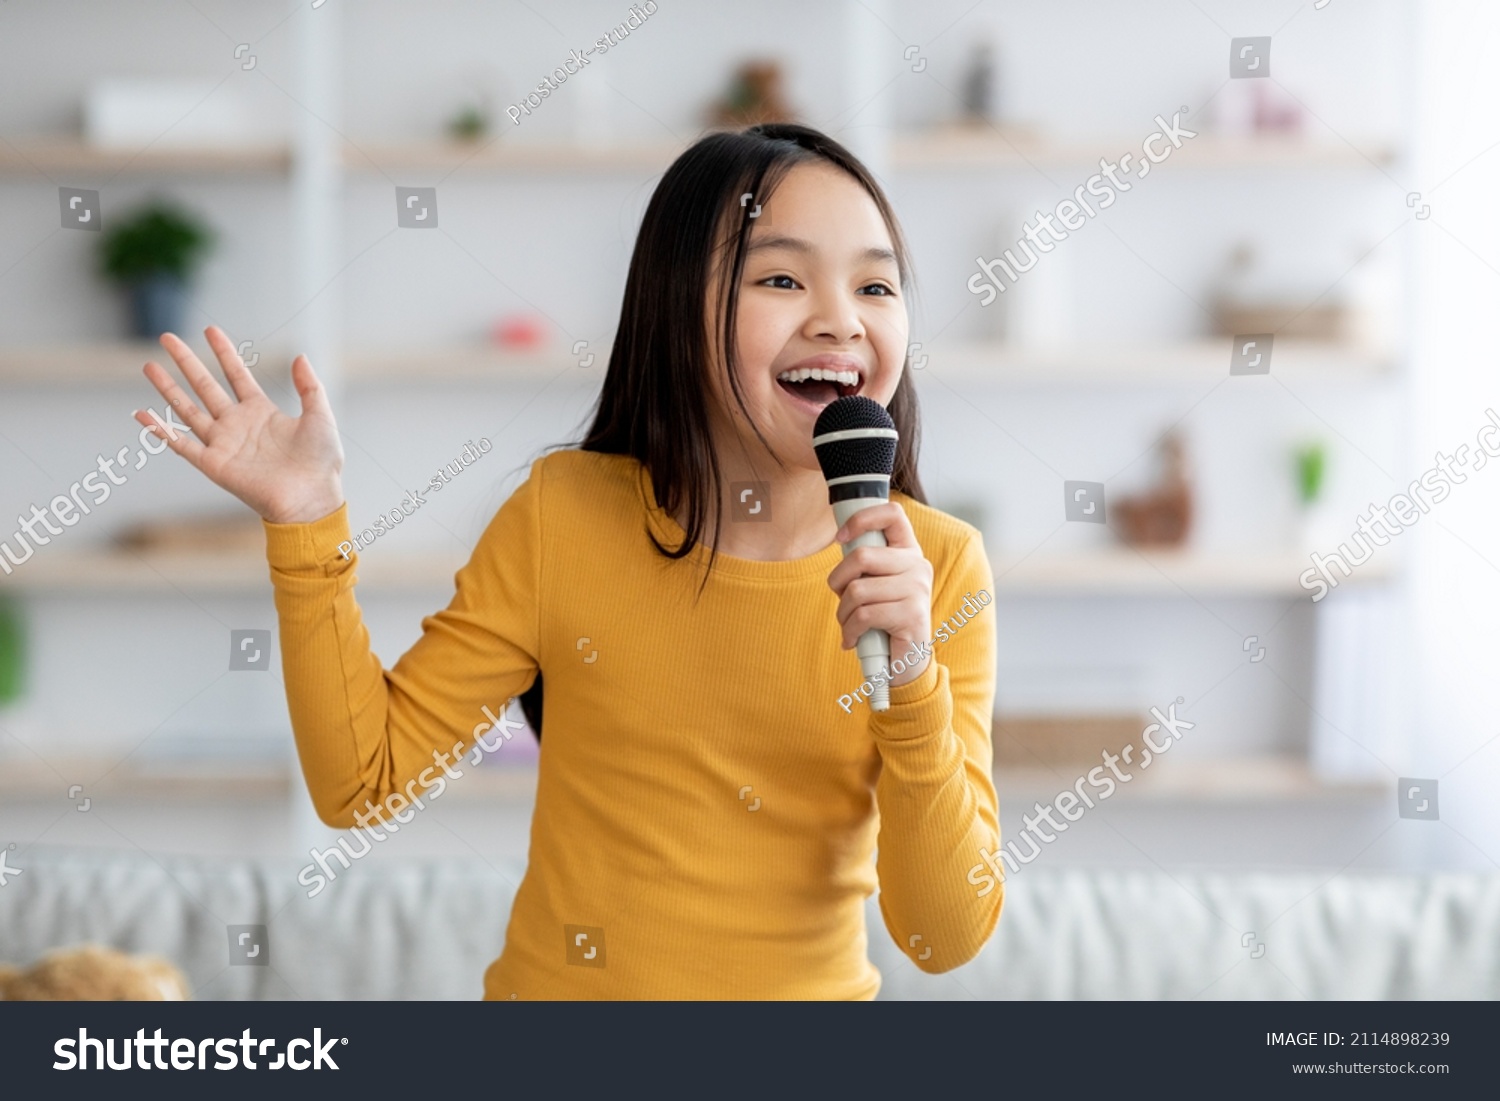 Portrait of cute pretty long-haired korean girl teenager singing at home, using microphone and gesturing, looking at copy space. Child singing karaoke, domestic entertainment for kids concept #2114898239